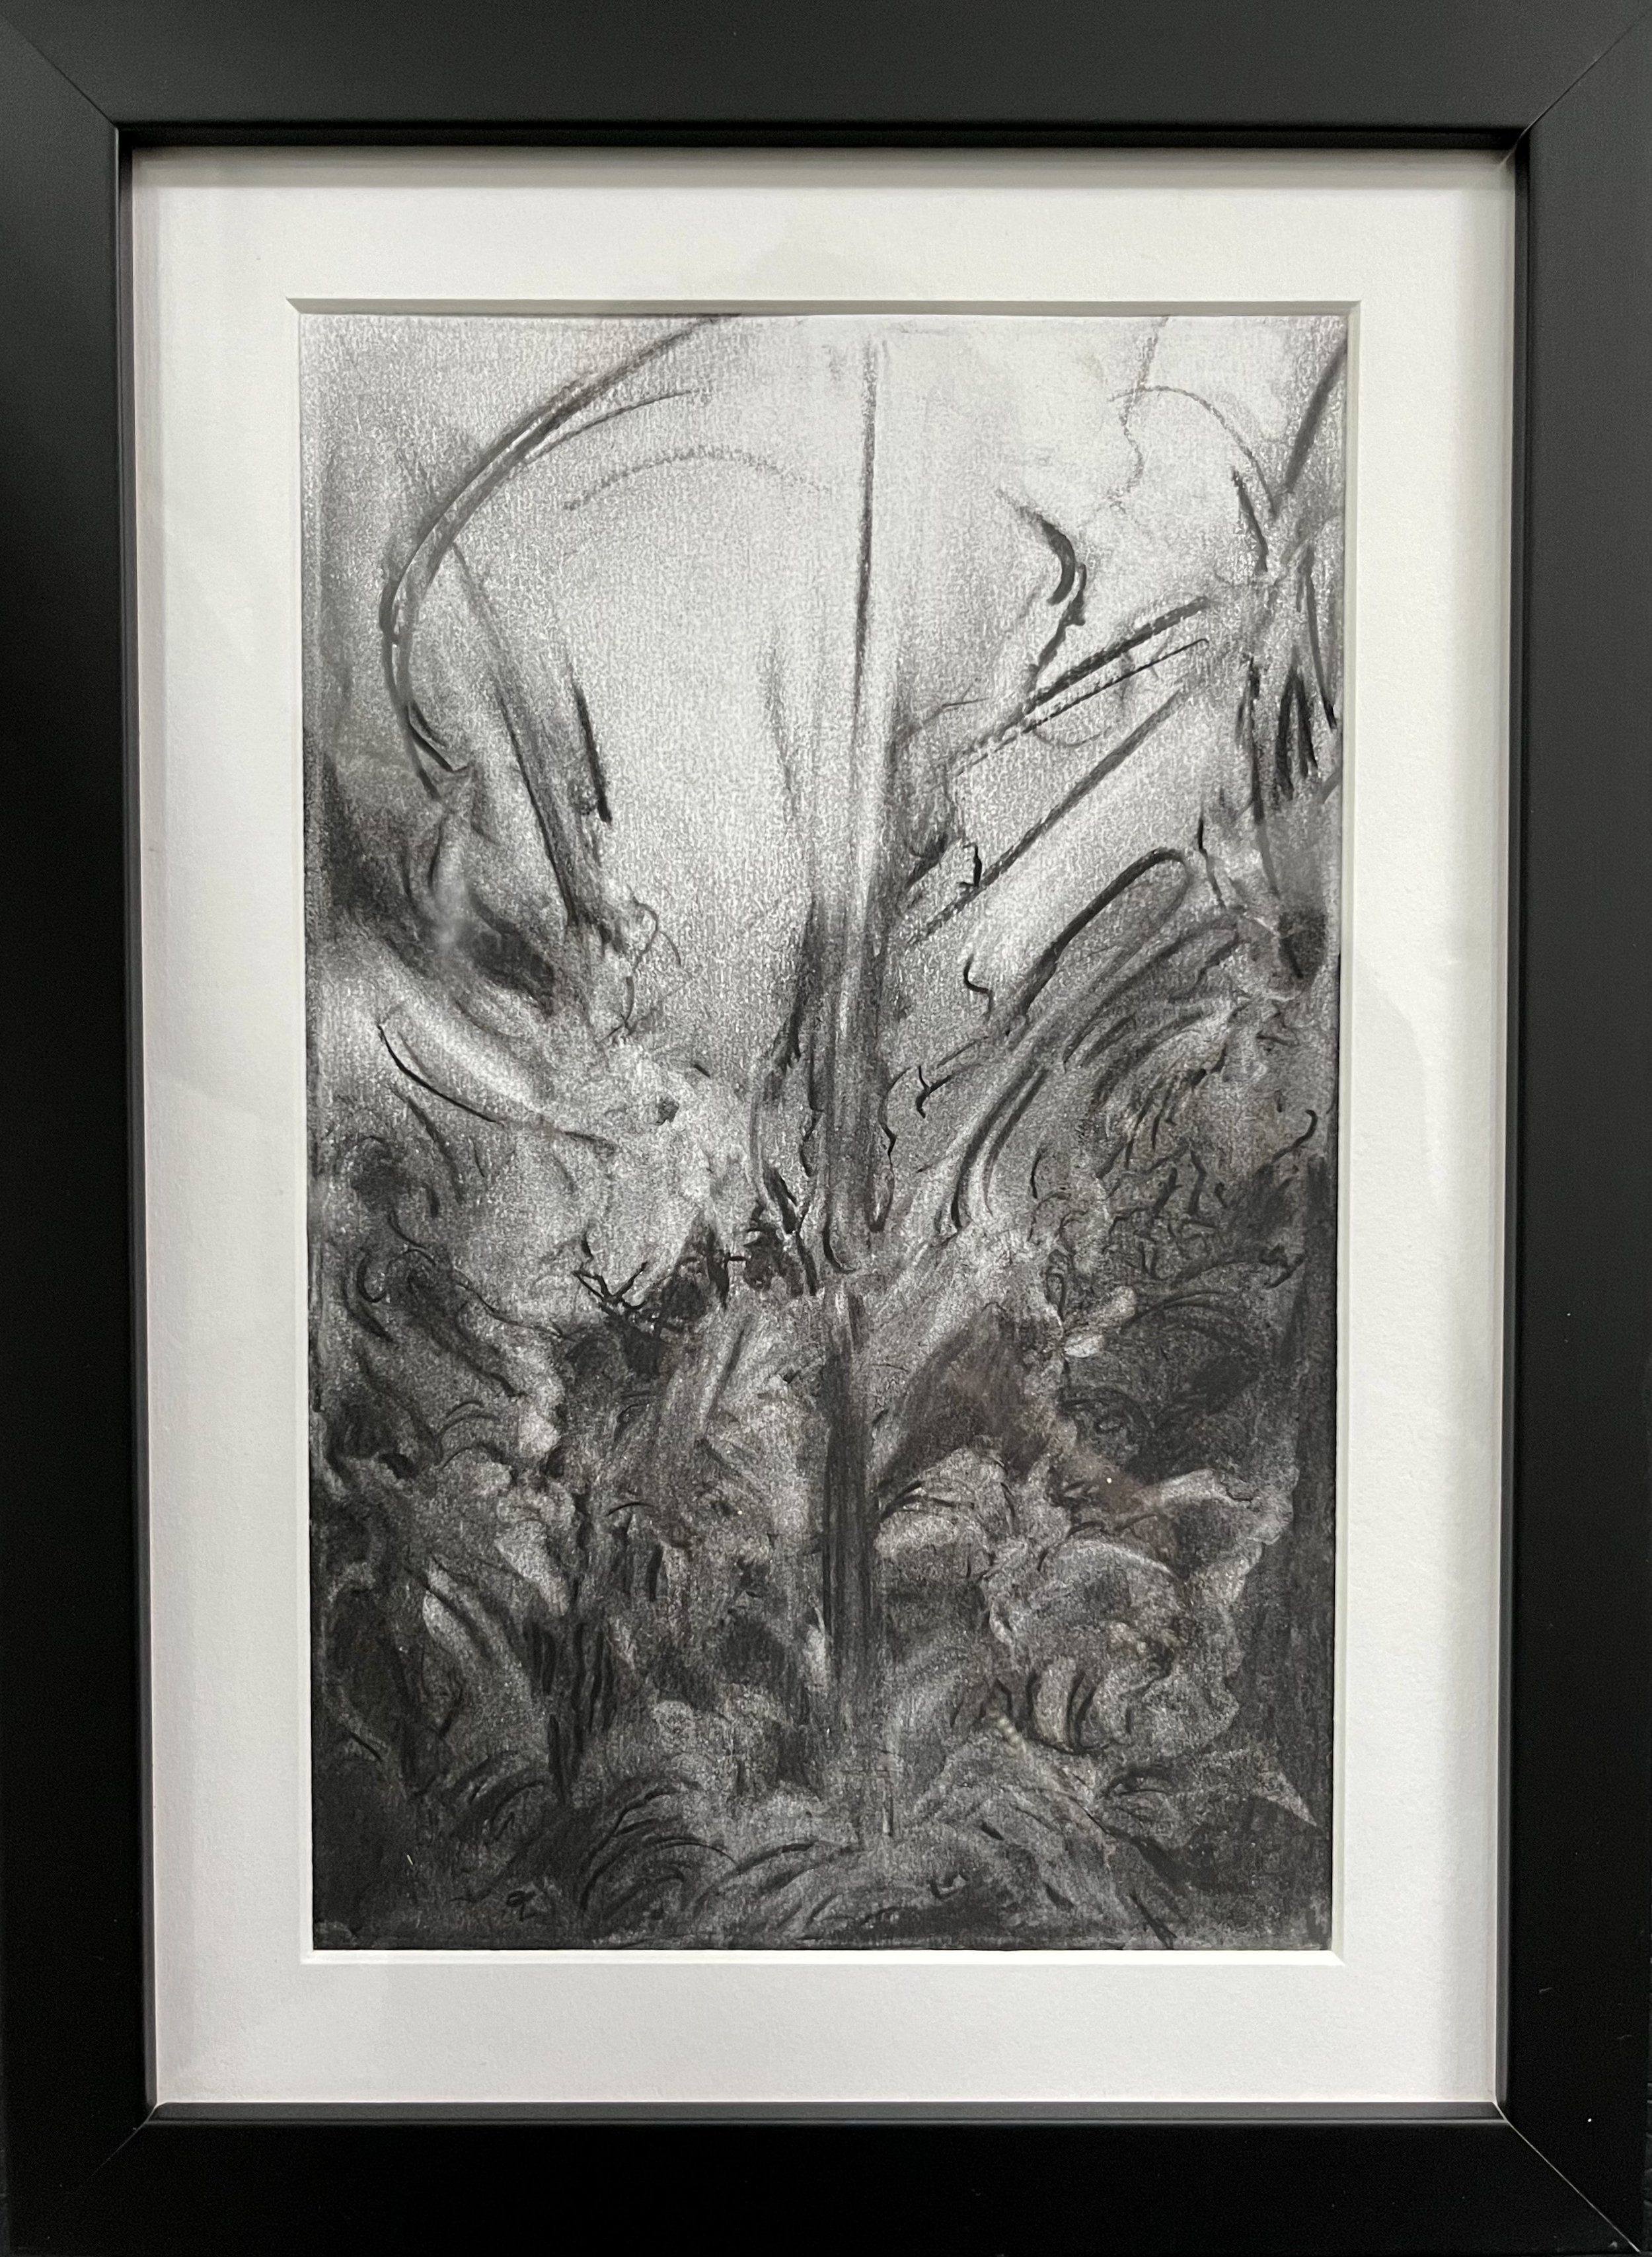 Charcoal Drawing on Gray Paper – Timed Drawing Exercise